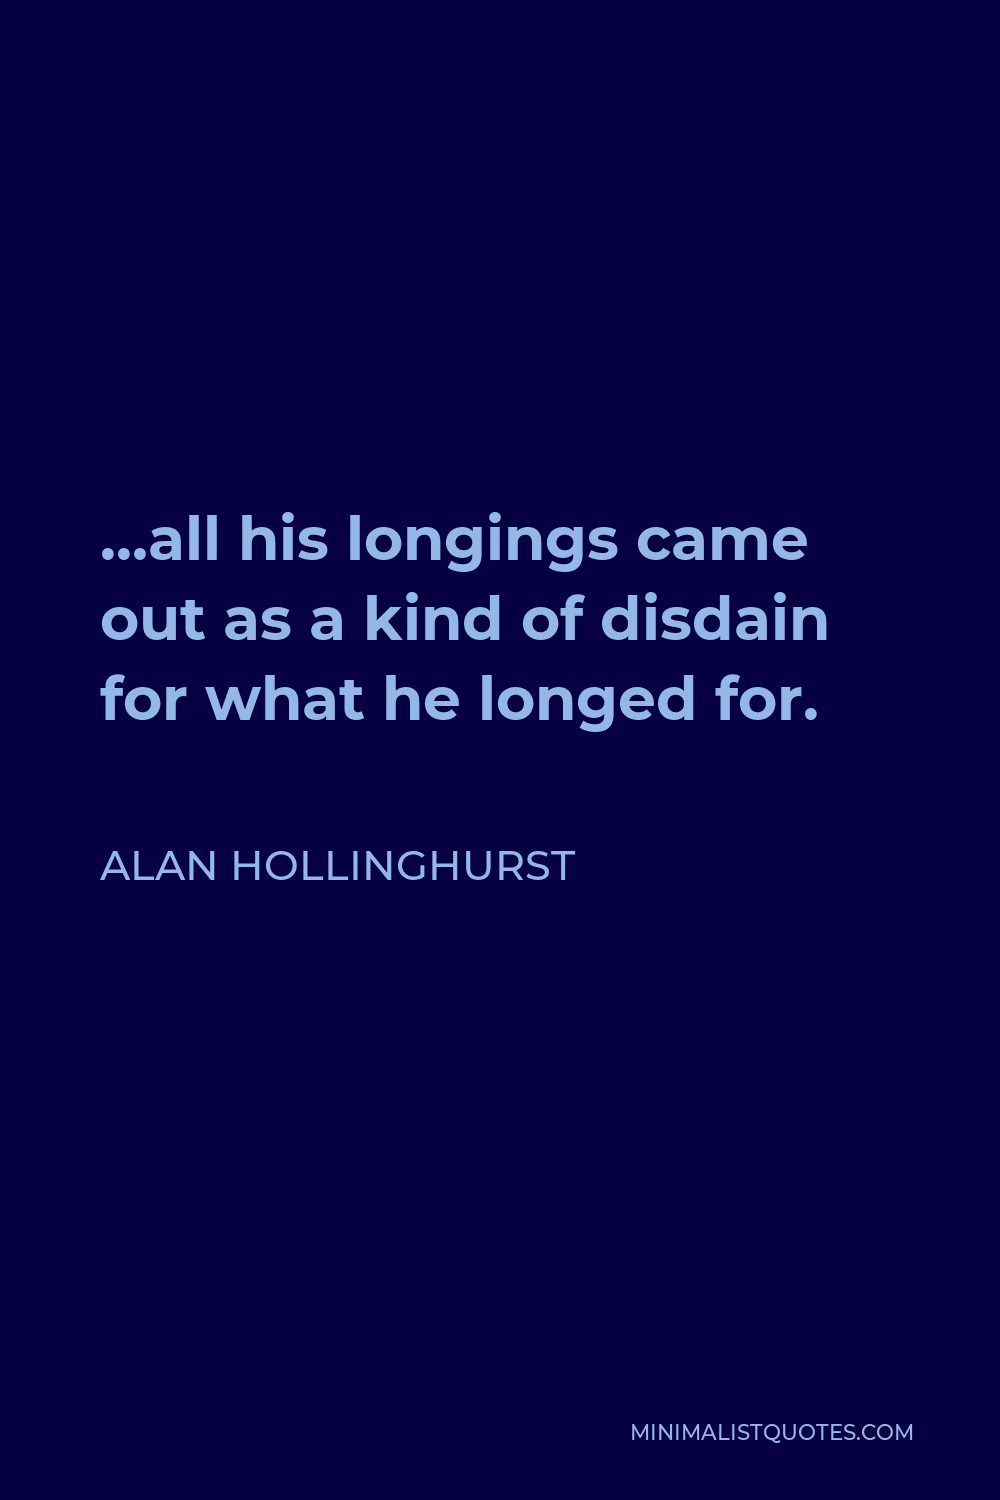 Alan Hollinghurst Quote - …all his longings came out as a kind of disdain for what he longed for.